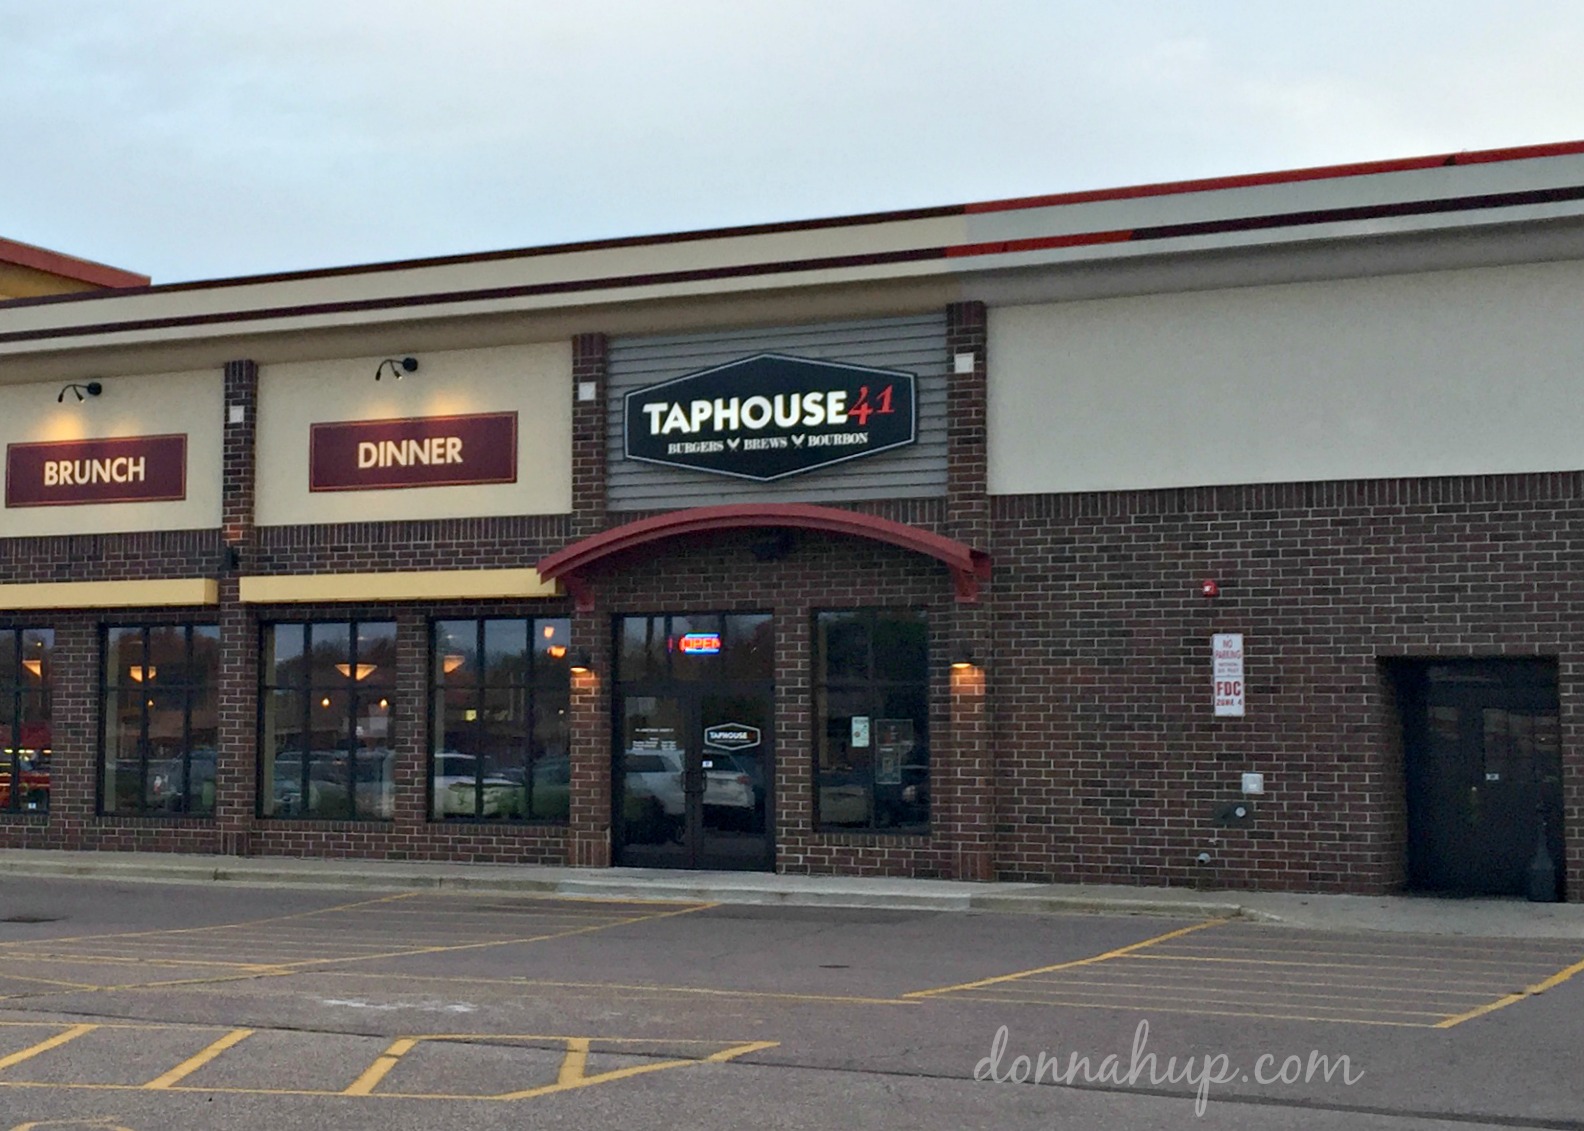 You'll love the Burgers at Taphouse 41